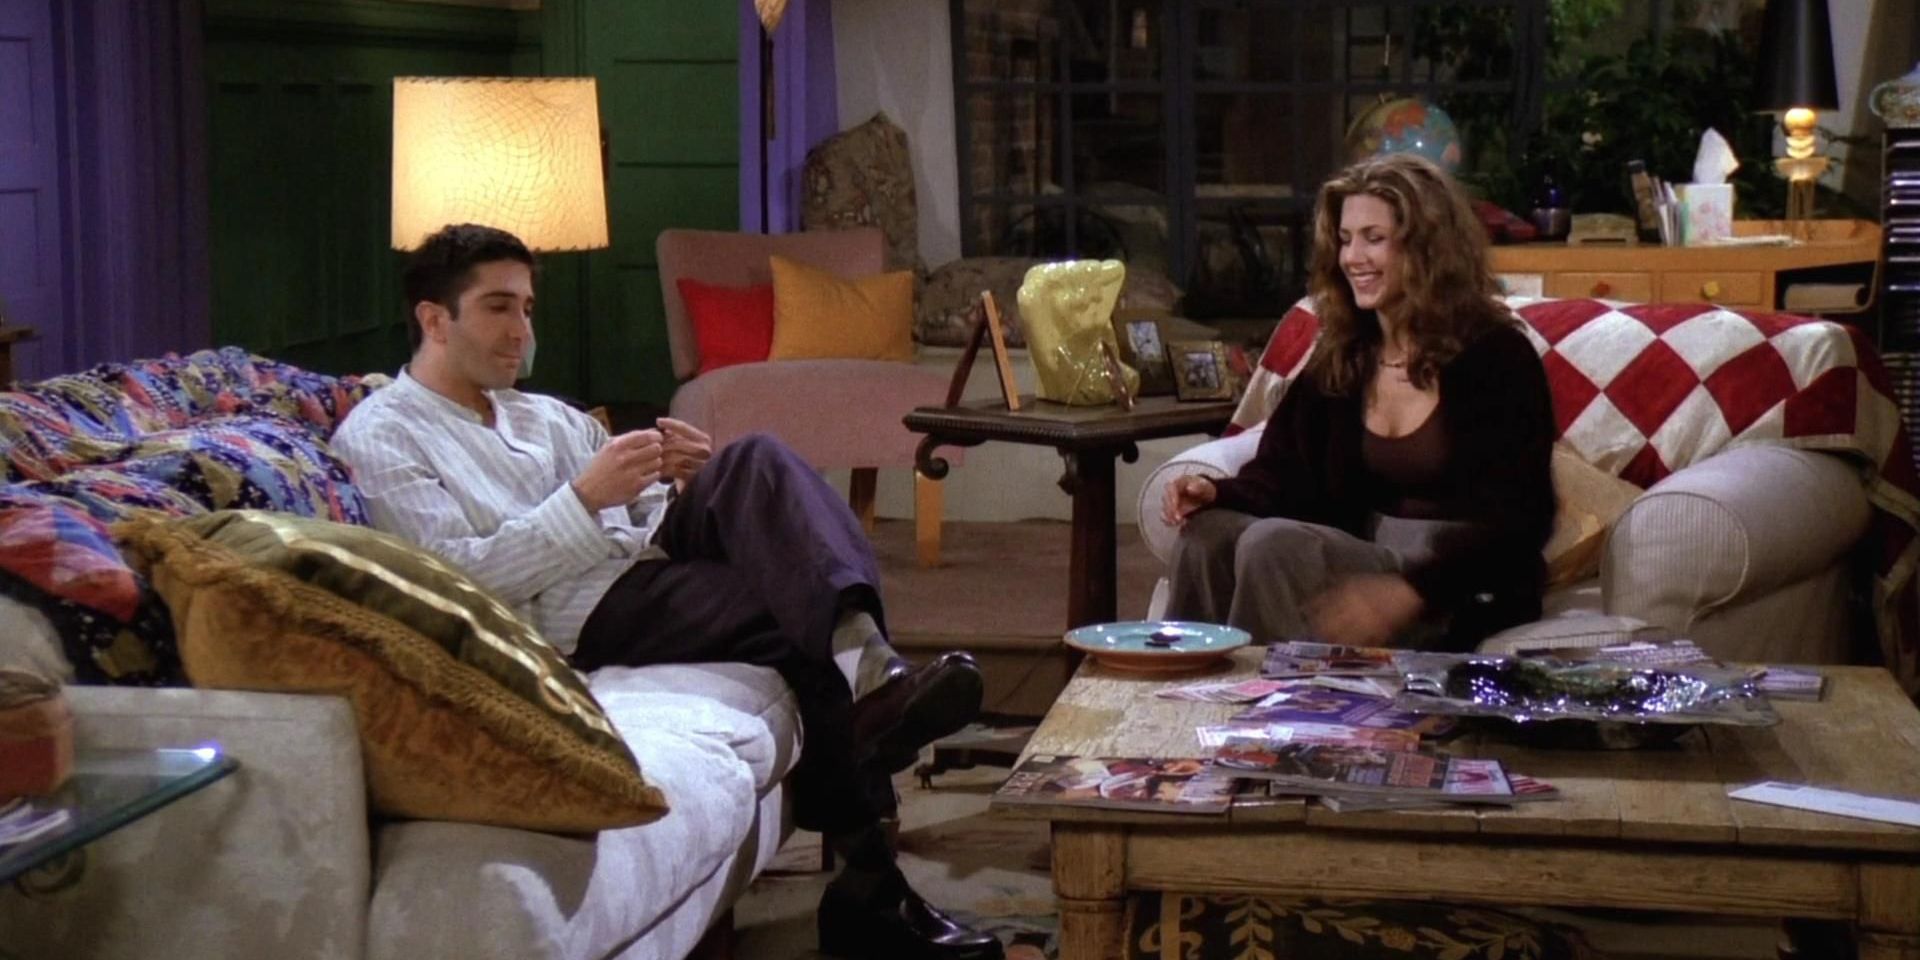 Ross and Rachel talk in the living room in the pilot of Friends.